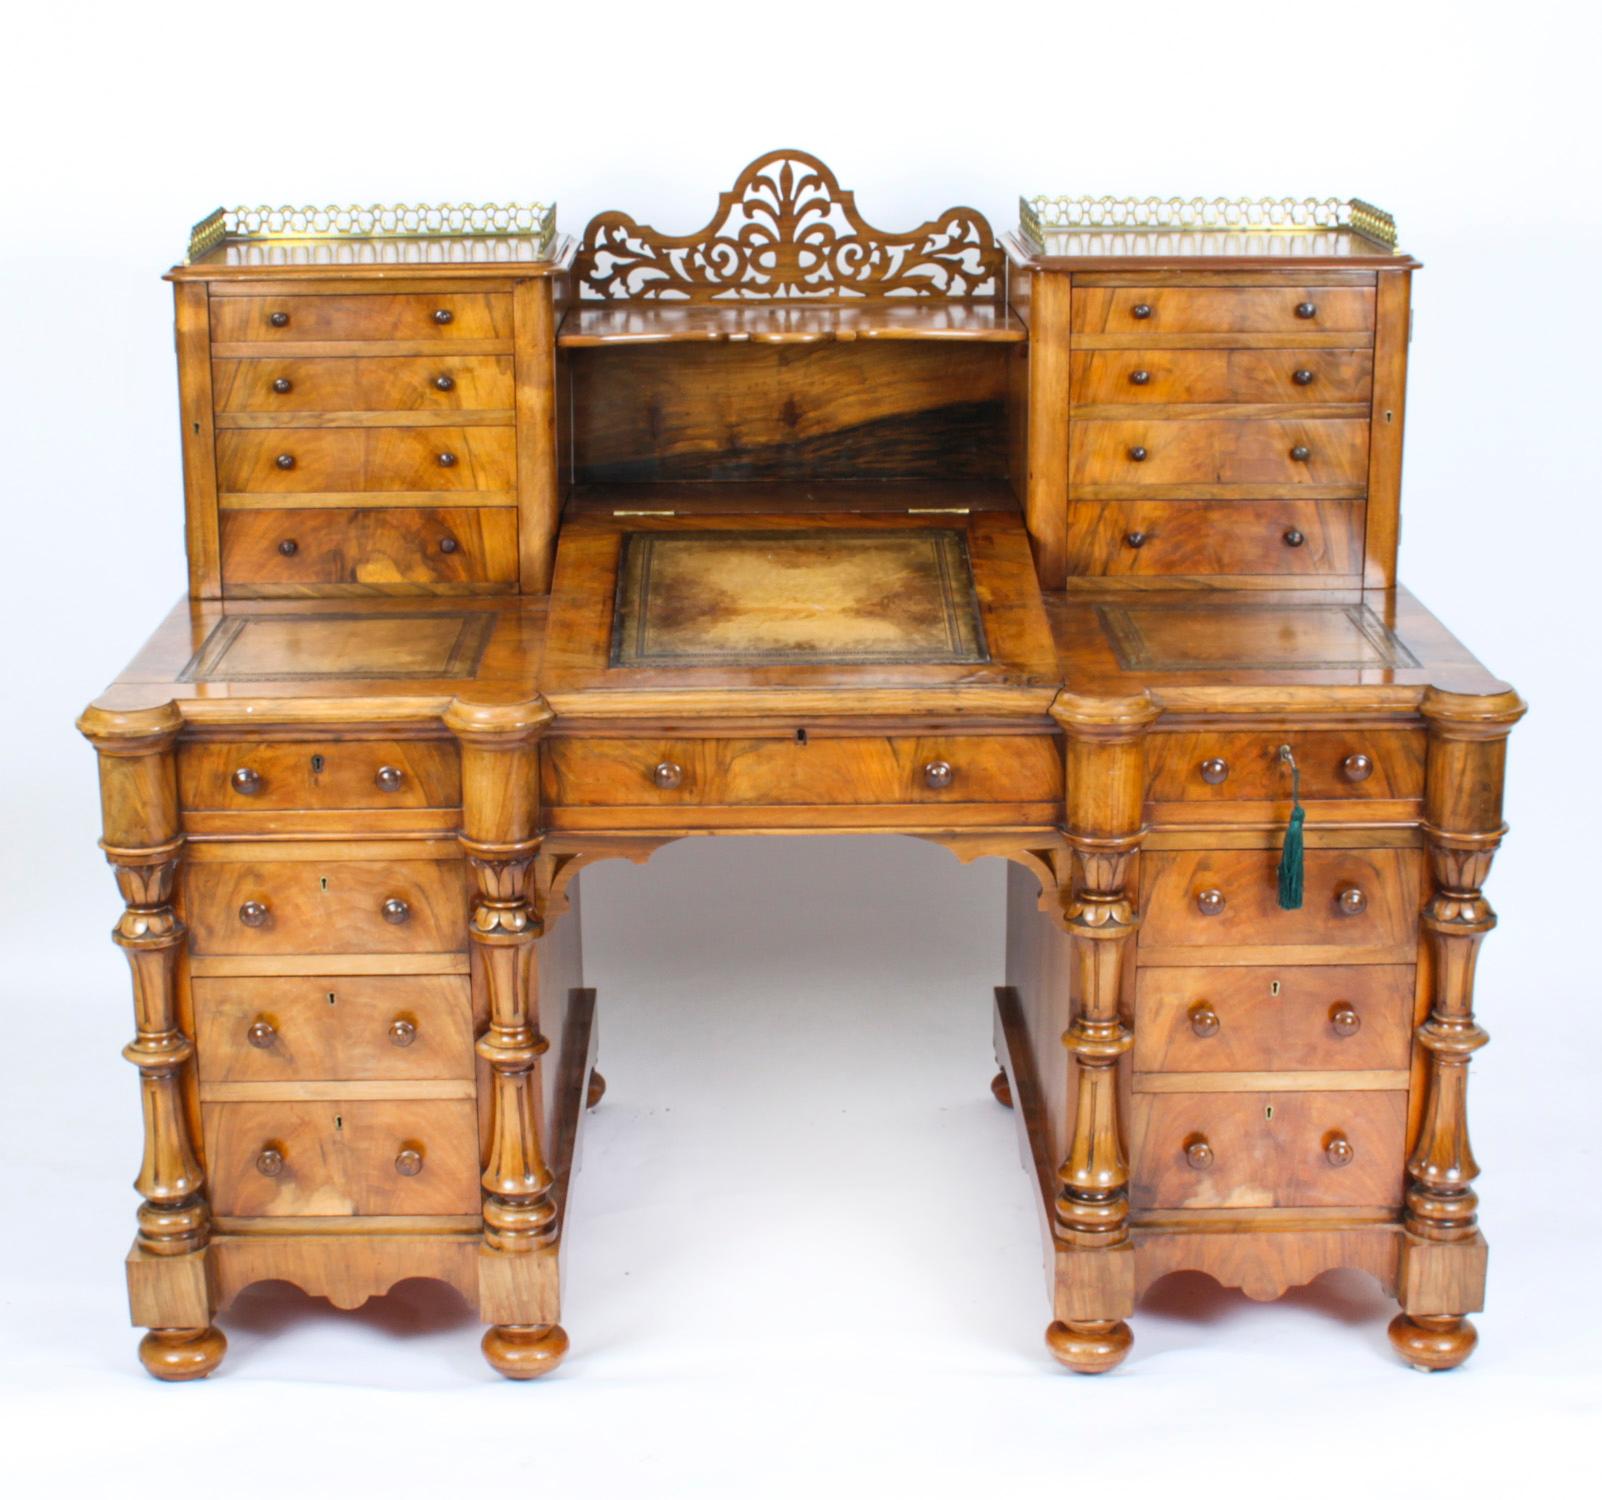 This is a truly superb antique Victorian Period burr walnut Dickens pedestal desk, circa 1880 in date.

The sunken central superstructure is flanked on either side by columns of five drawers centred by a gallery shelf above a hinged surface